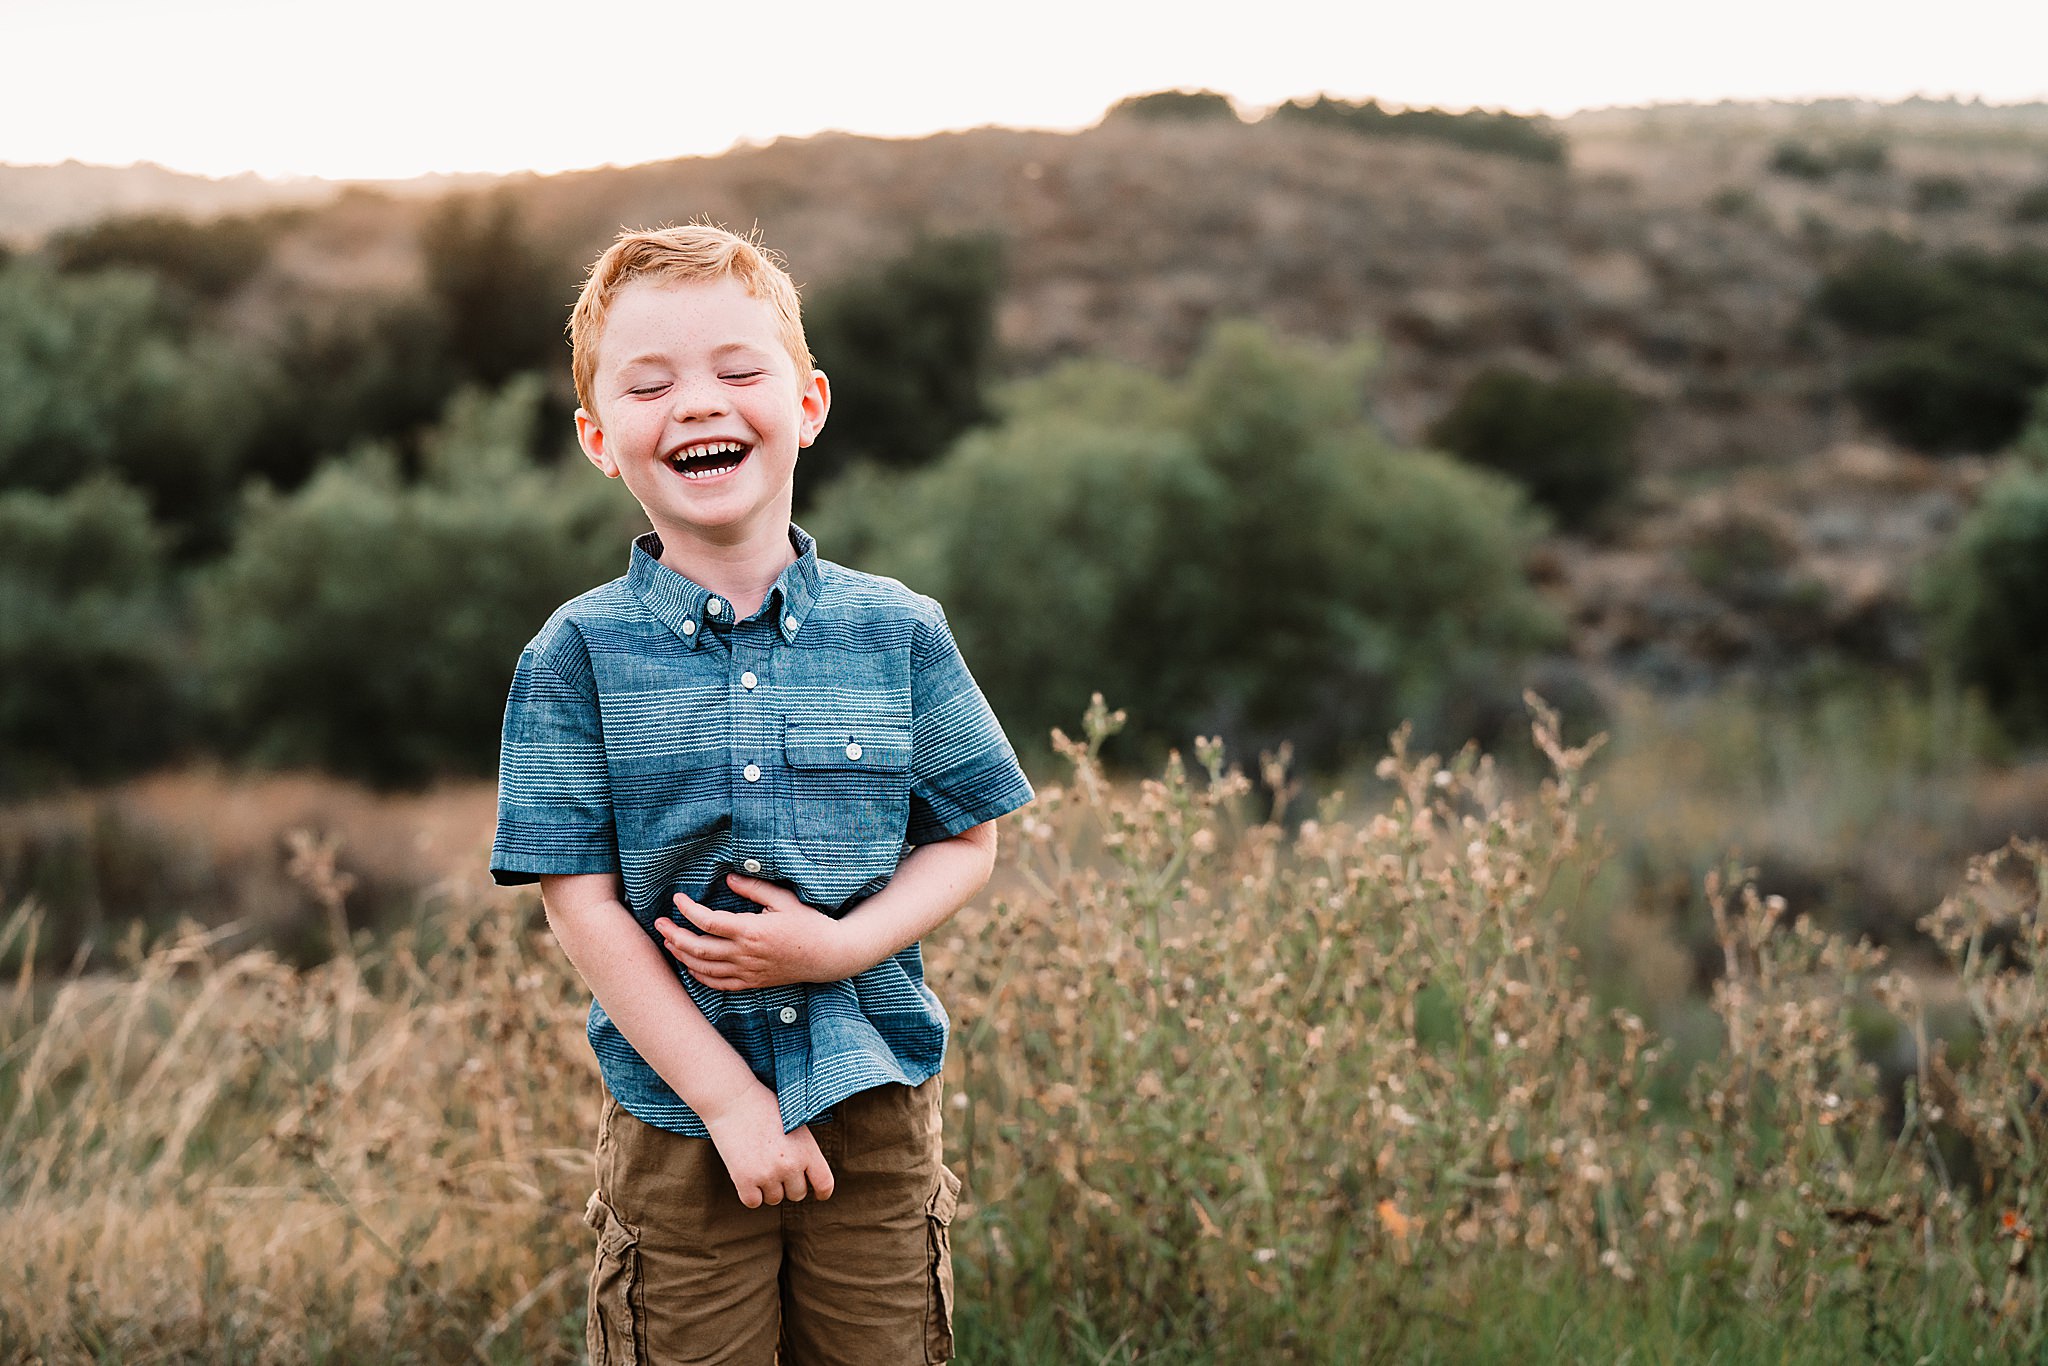 San Marcos Photographer, Family Photography in San Marcos. San Marcos Photography, Fallbrook Photography, Carlsbad Photography, Carlsbad Photographer, Photographer in Carlsbad